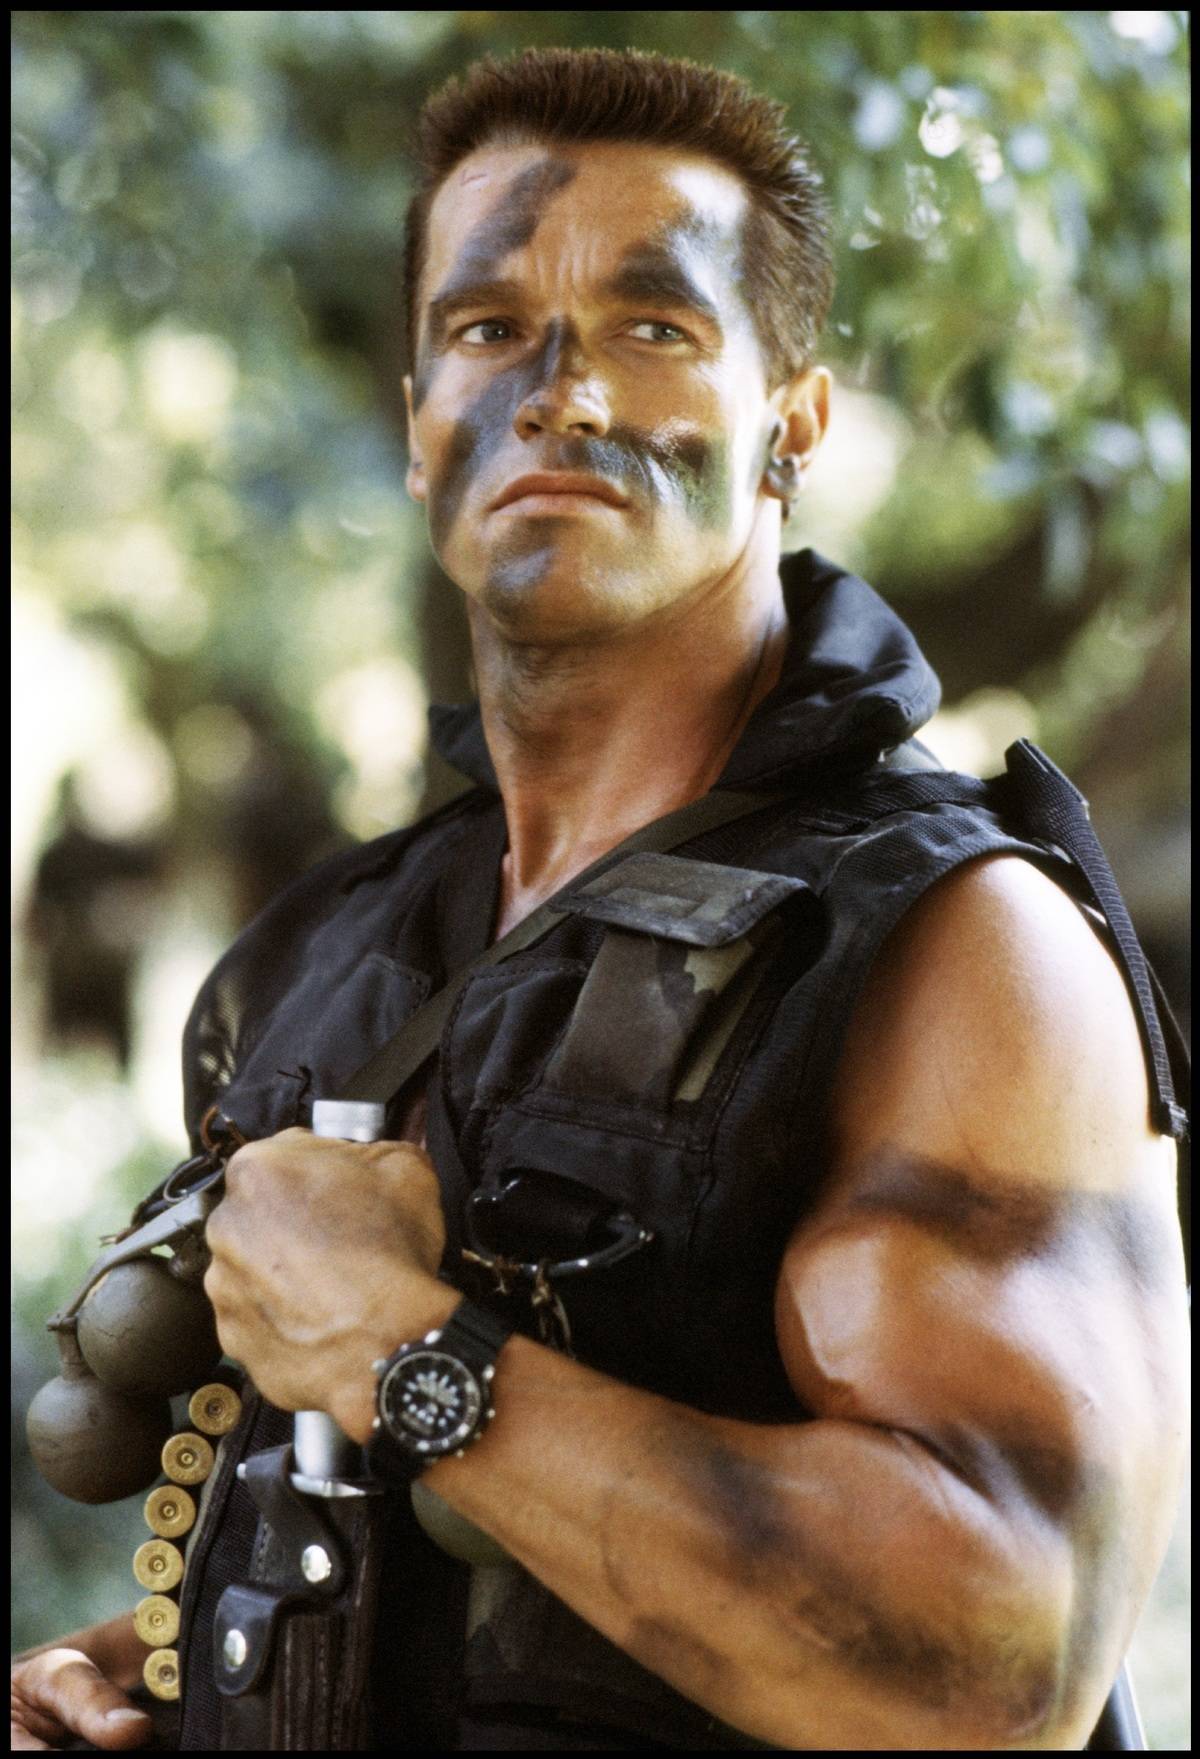 <p>A typical 1980s Arnold Schwarzenegger-led film, <i>Commando </i>is filled with witting one-liners, an underdeveloped plot, and ridiculous action sequences. Even so, it is one of the standout movies of the decade, one that critics believe is vastly underrated.</p> <p>In his review, Patrick Goldstein of the <i><a href="https://www.latimes.com/" rel="noopener noreferrer">Los Angeles Times</a></i> said, "Full of spectacular stunts and shootouts, it's a gory crowd-pleaser, directed with jolting efficiency by low-budget veteran Mark L. Lester." The film debuted at number one in 1985 and held the position for three consecutive weeks.</p>